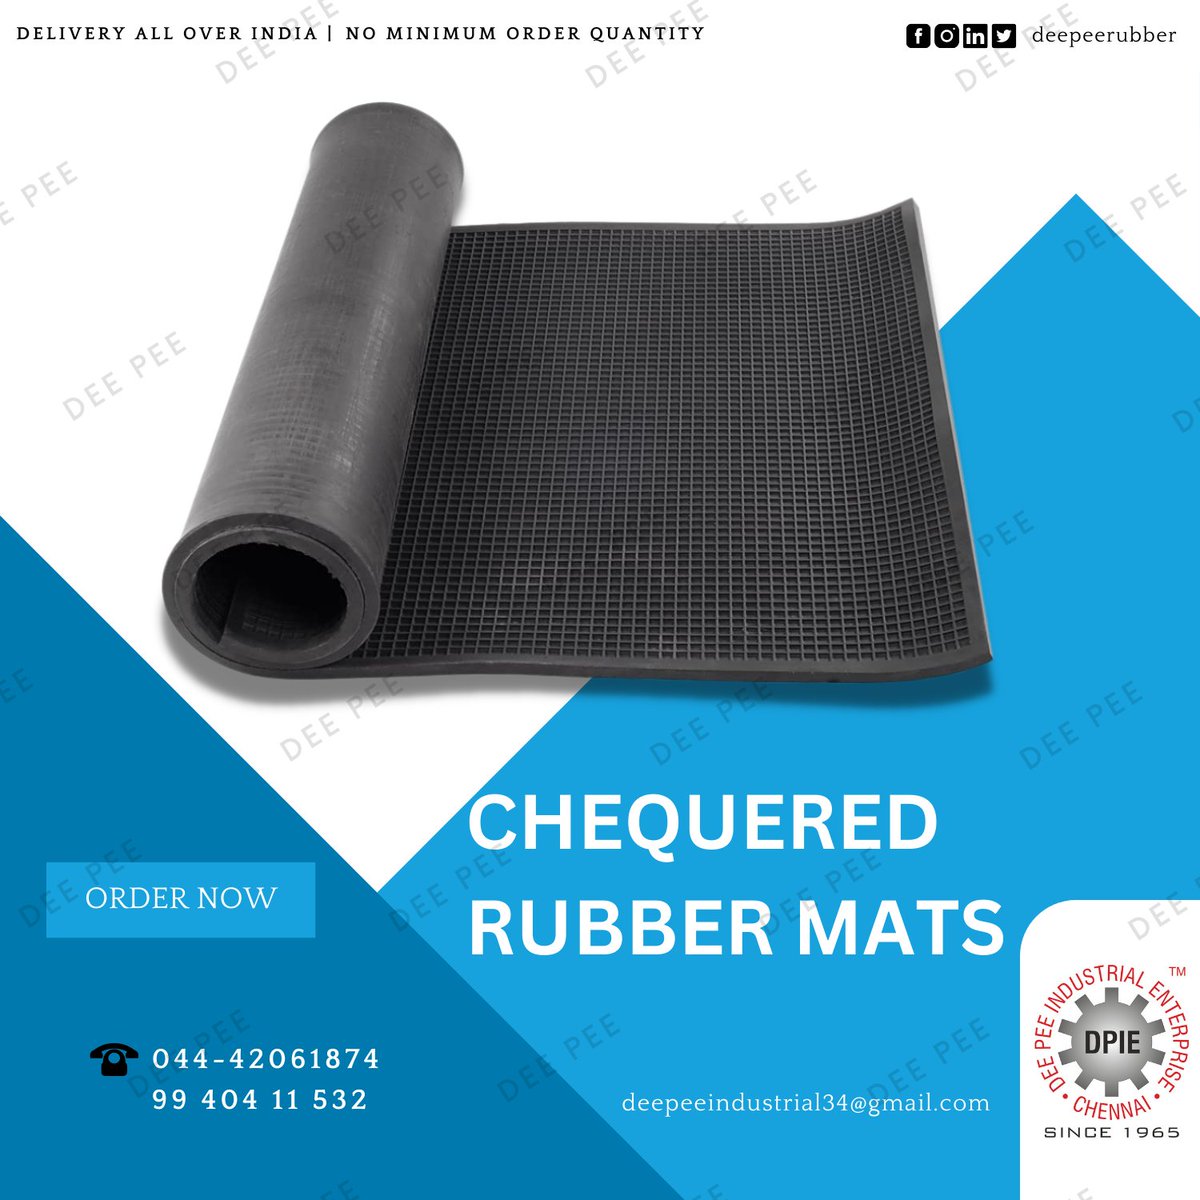 Call now for your orders.!
044 42061874 / 25222387 / 25212267 / +91 9940411532
deepeeindustrial@yahoo.com

#deepeeindustrial #deepee #deepeeenterprise #rubberproducts #rubberindustry #rubber #manufacturing